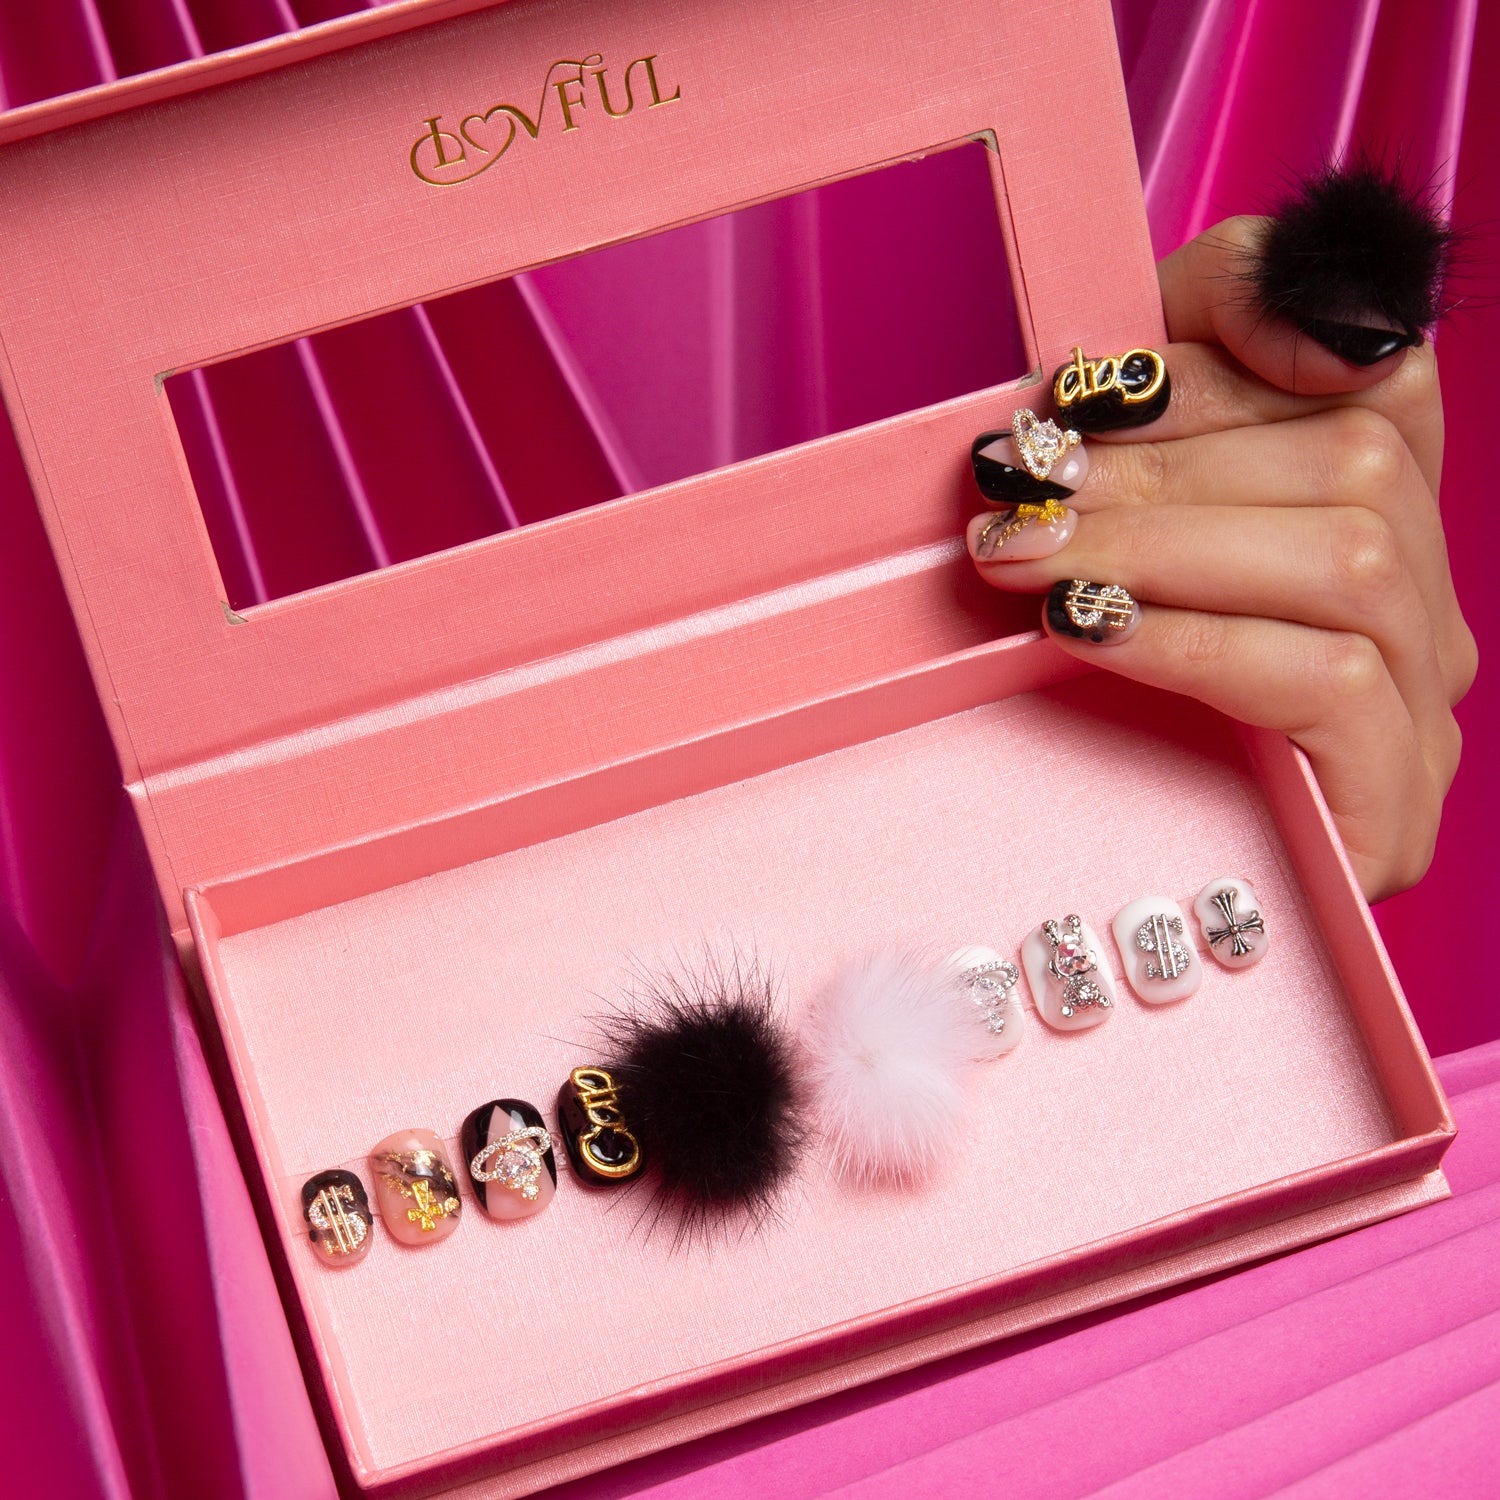 Pink box displaying a set of Capricorn-themed press-on nails with detachable black and white fluffy balls and small intricate decorations, held by a hand with matching nails